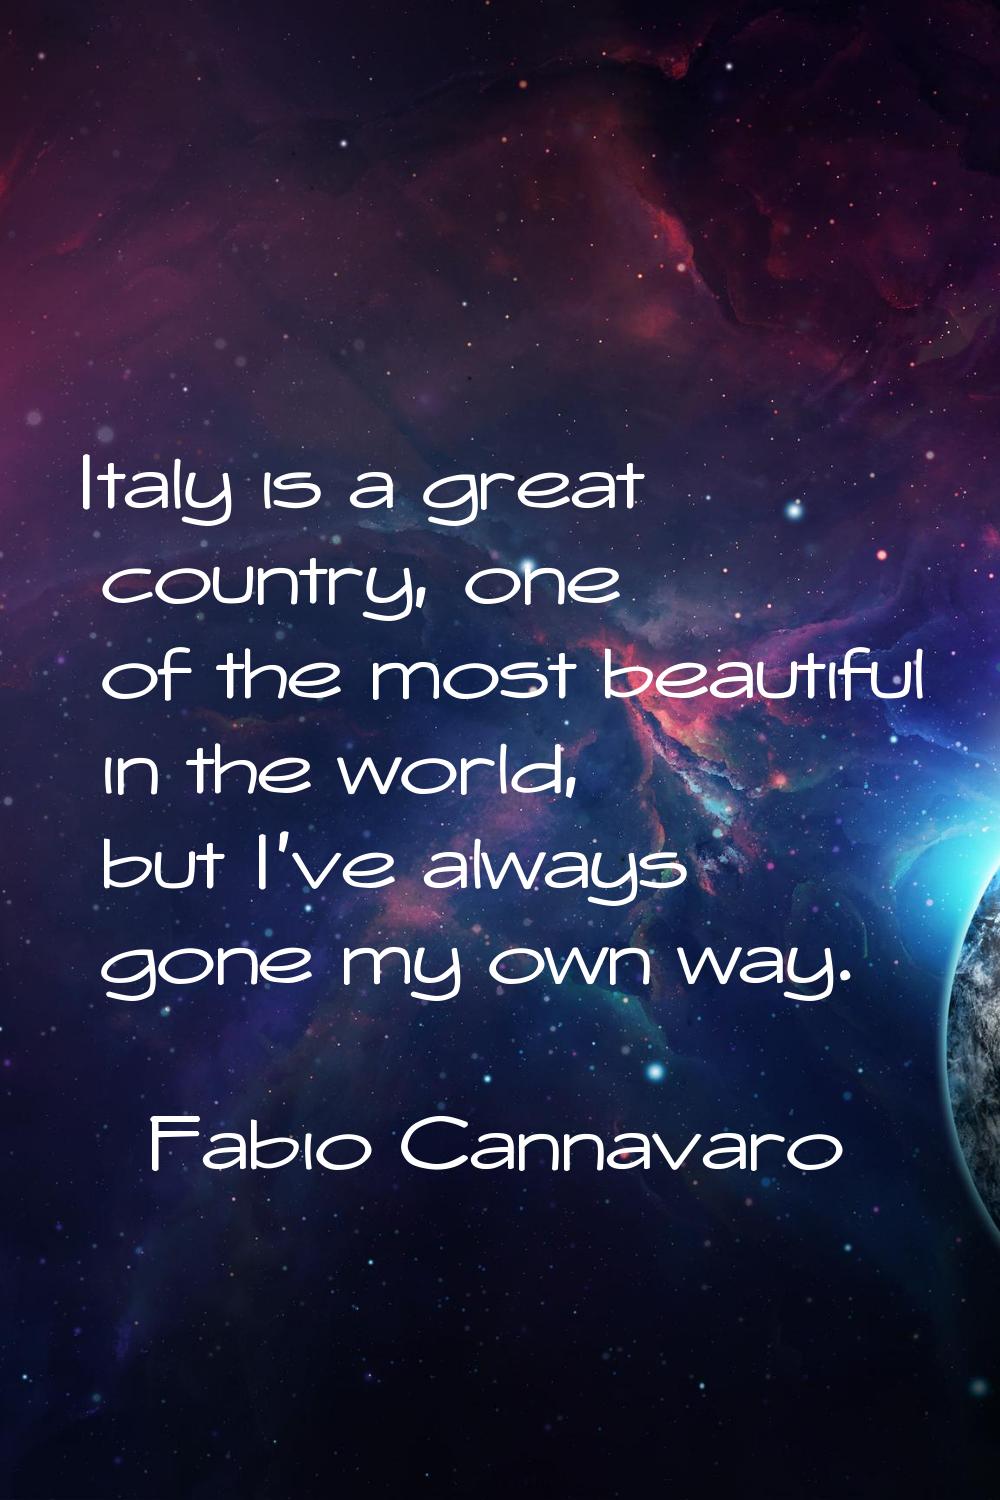 Italy is a great country, one of the most beautiful in the world, but I've always gone my own way.